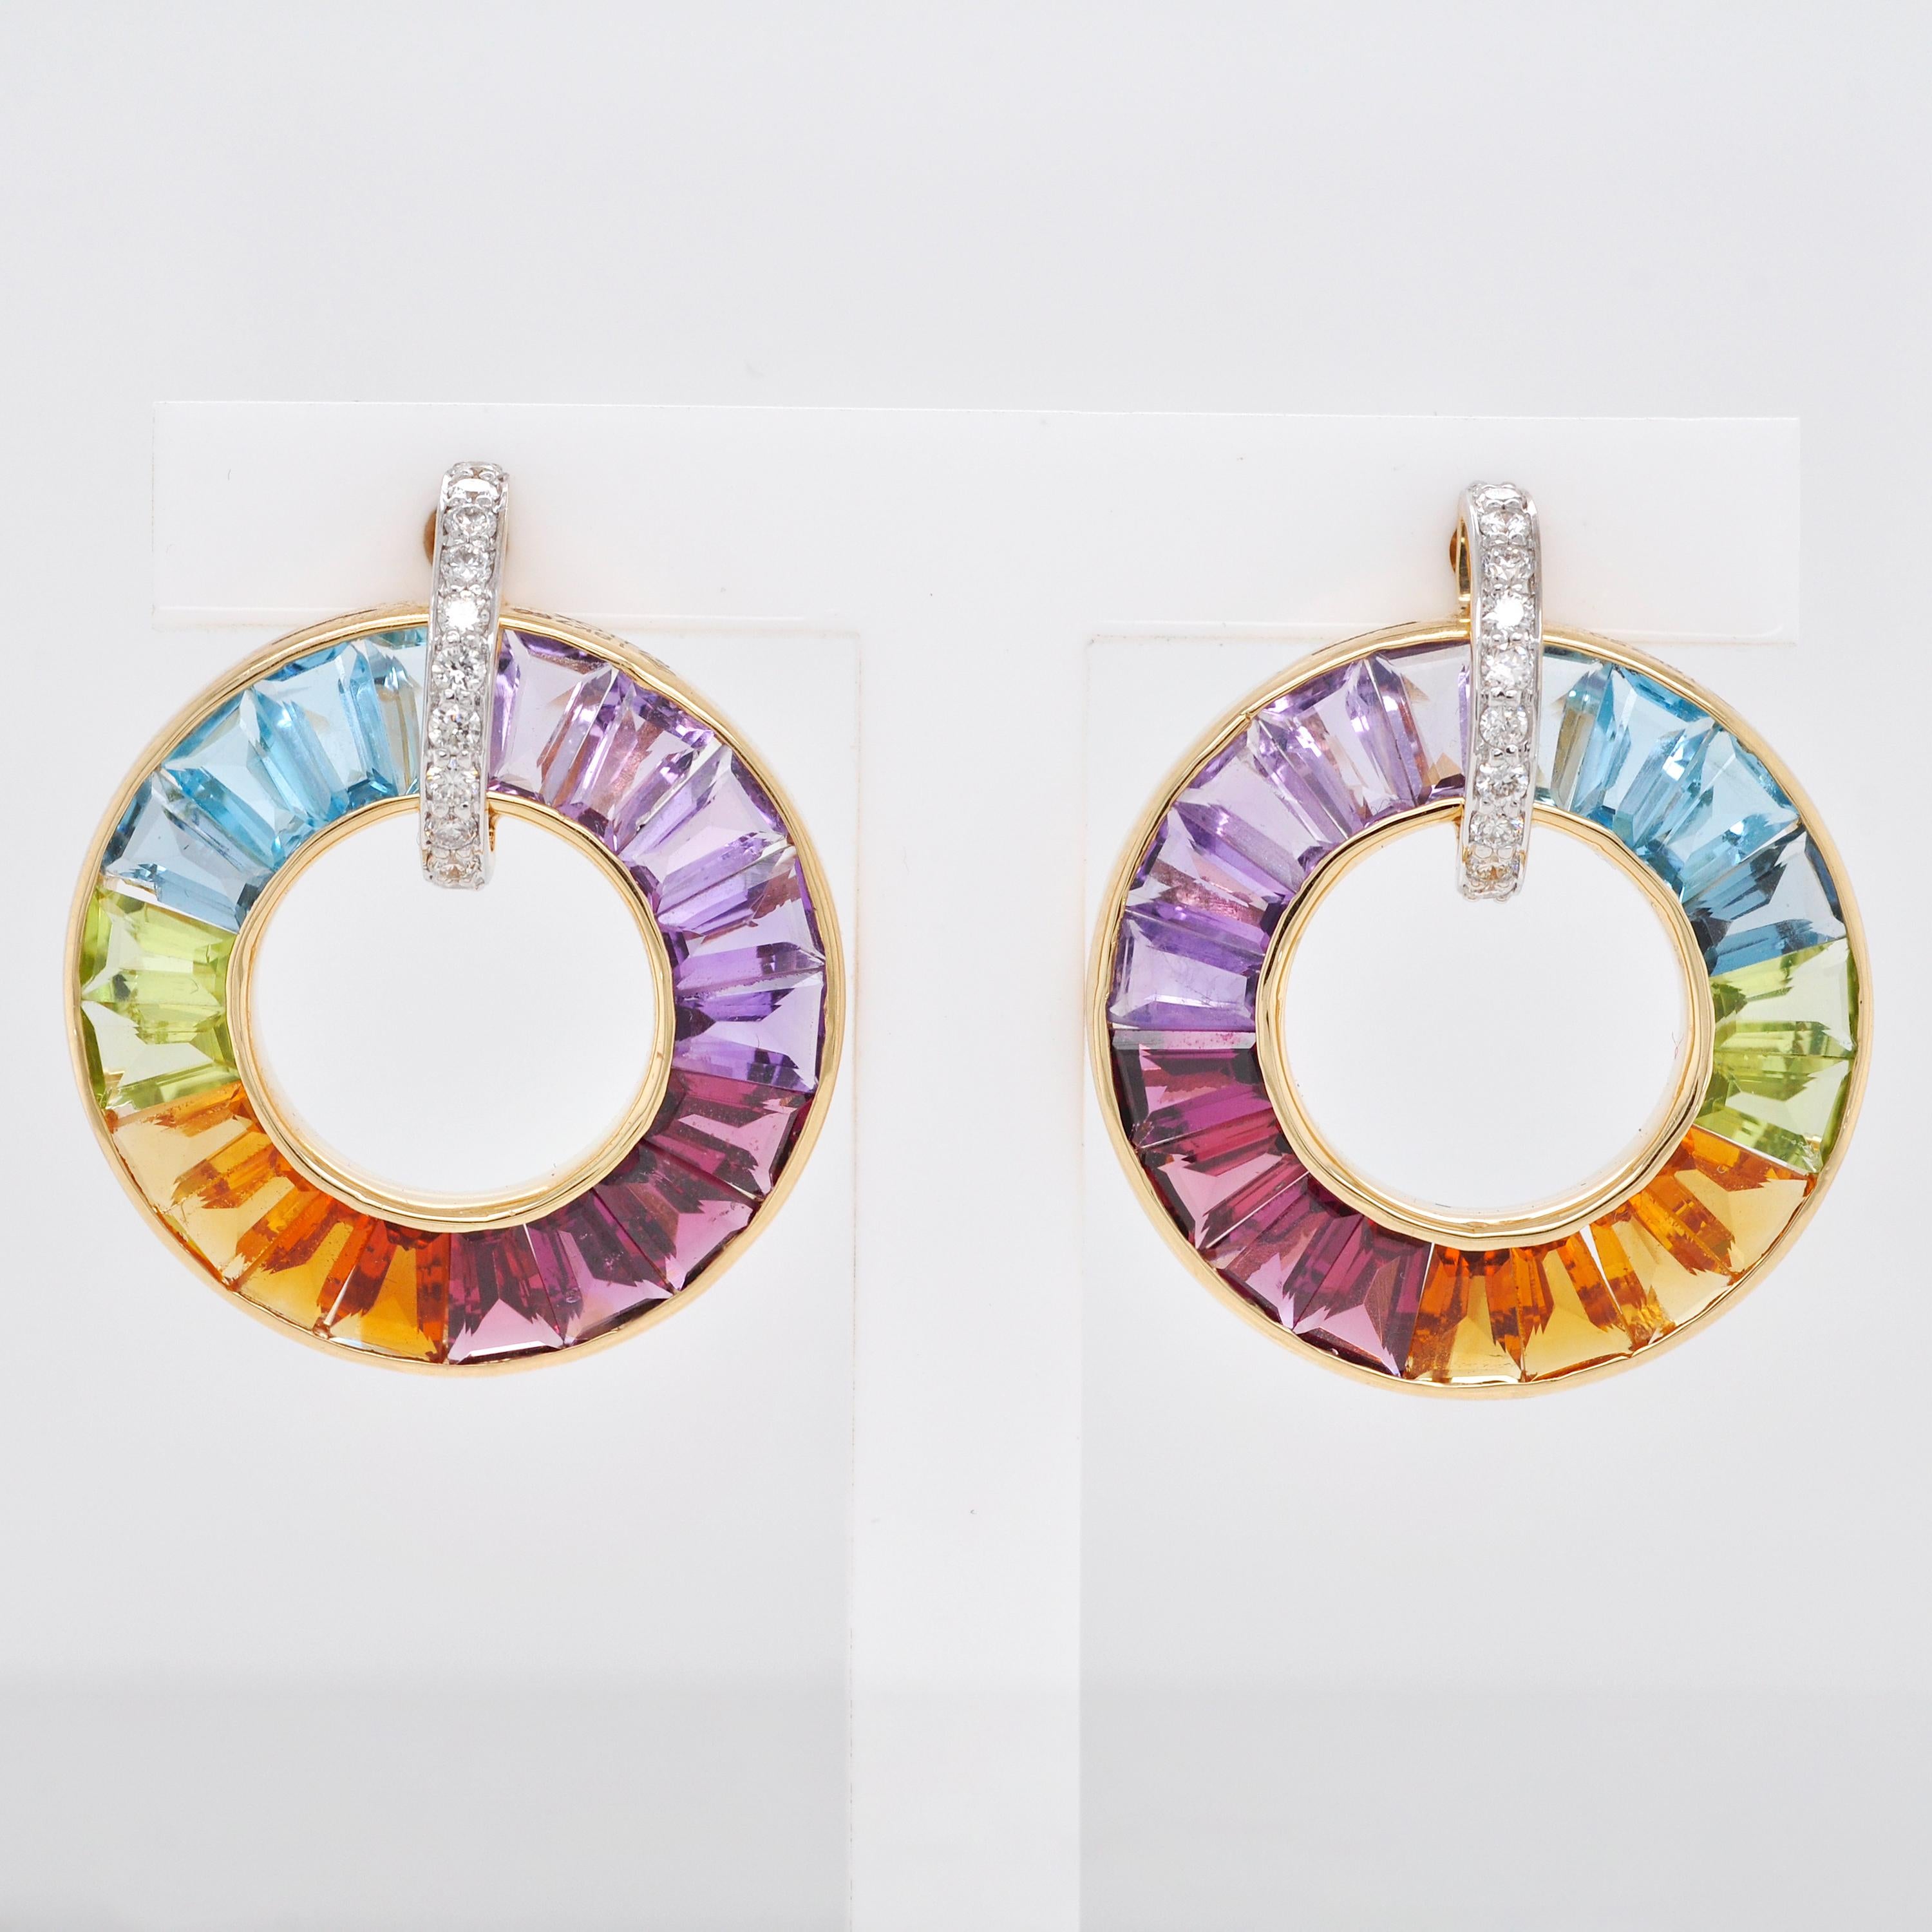 18K Yellow Gold Art Deco Inspired Rainbow Gemstones Diamond Circle Stud Earrings In New Condition For Sale In Jaipur, Rajasthan